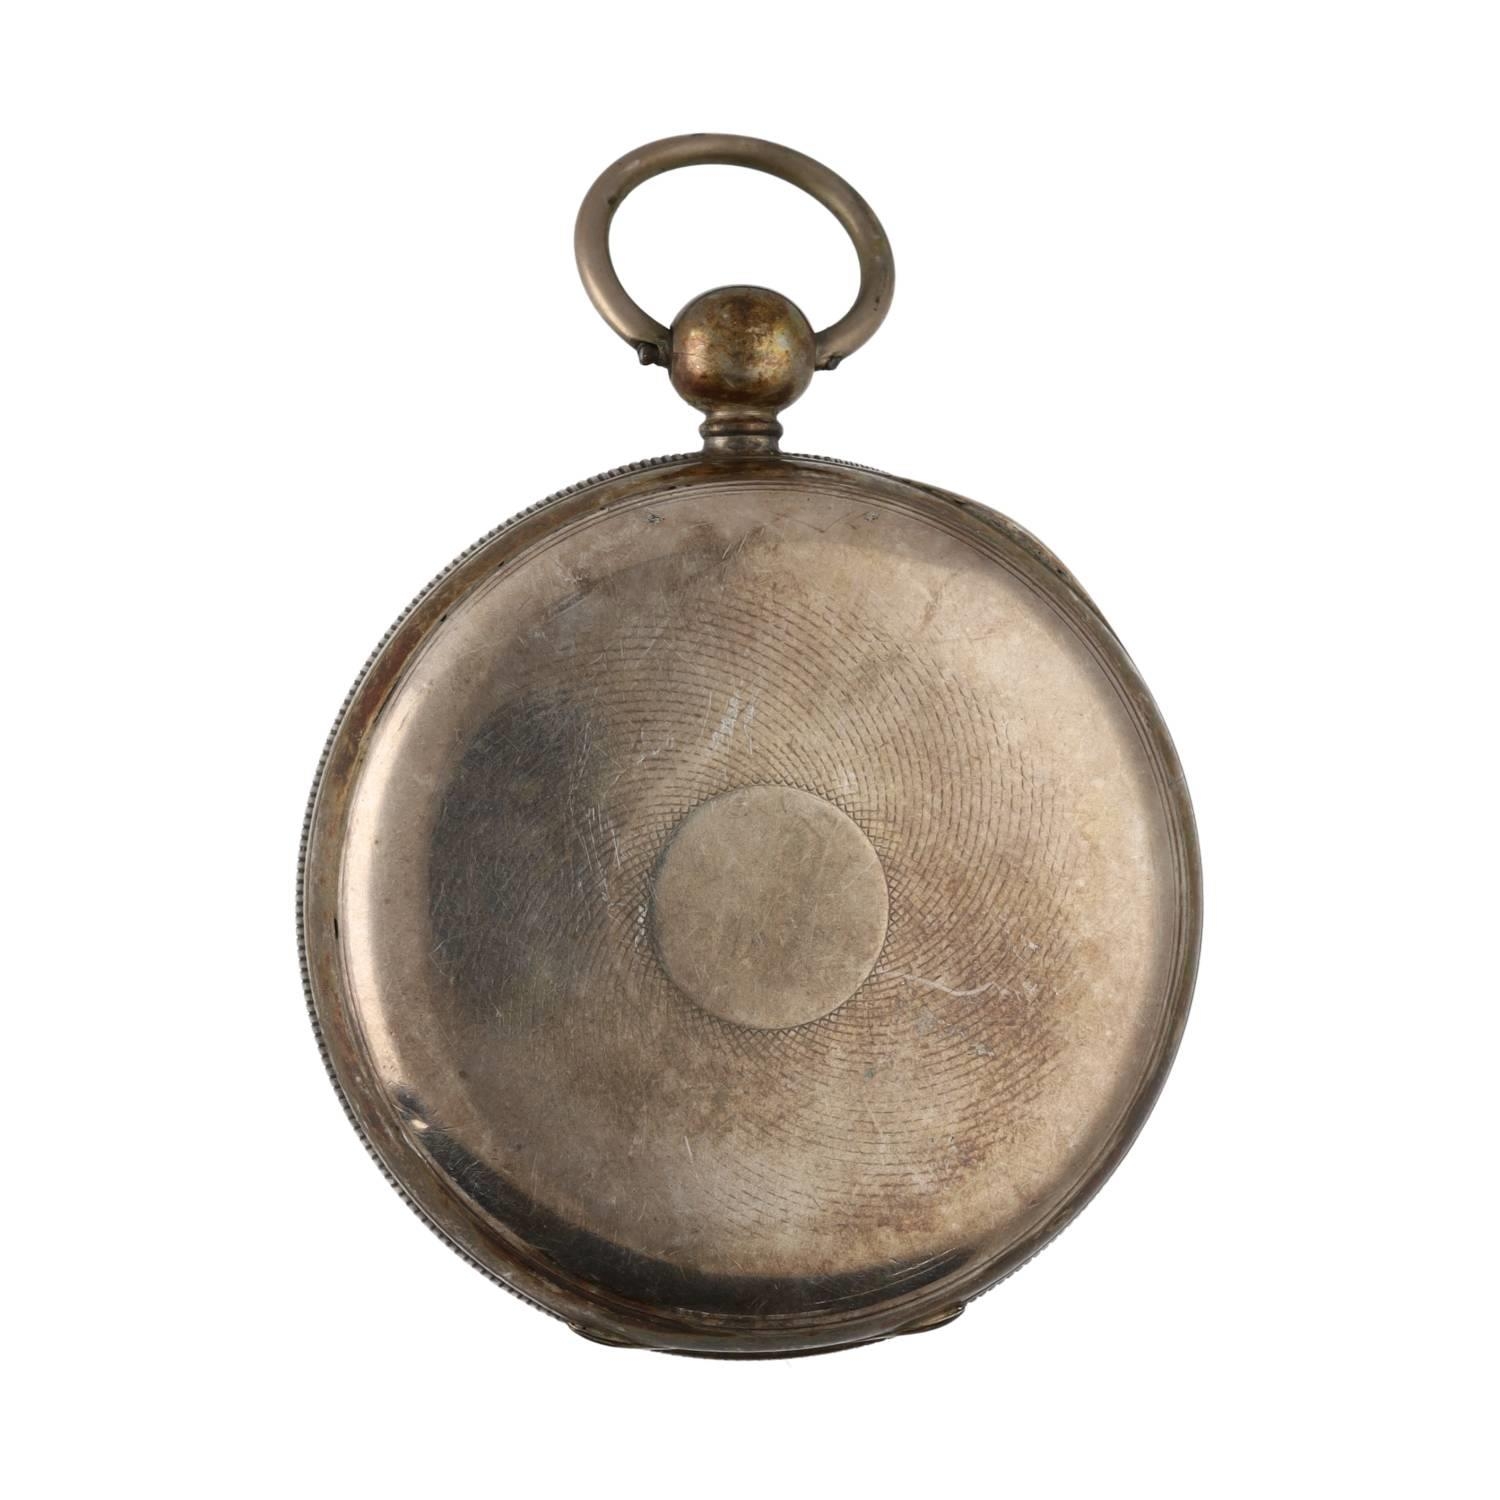 Grant & Sons, London - mid-19th century silver fusee rack lever pocket watch, Dublin 1862, signed - Image 4 of 4